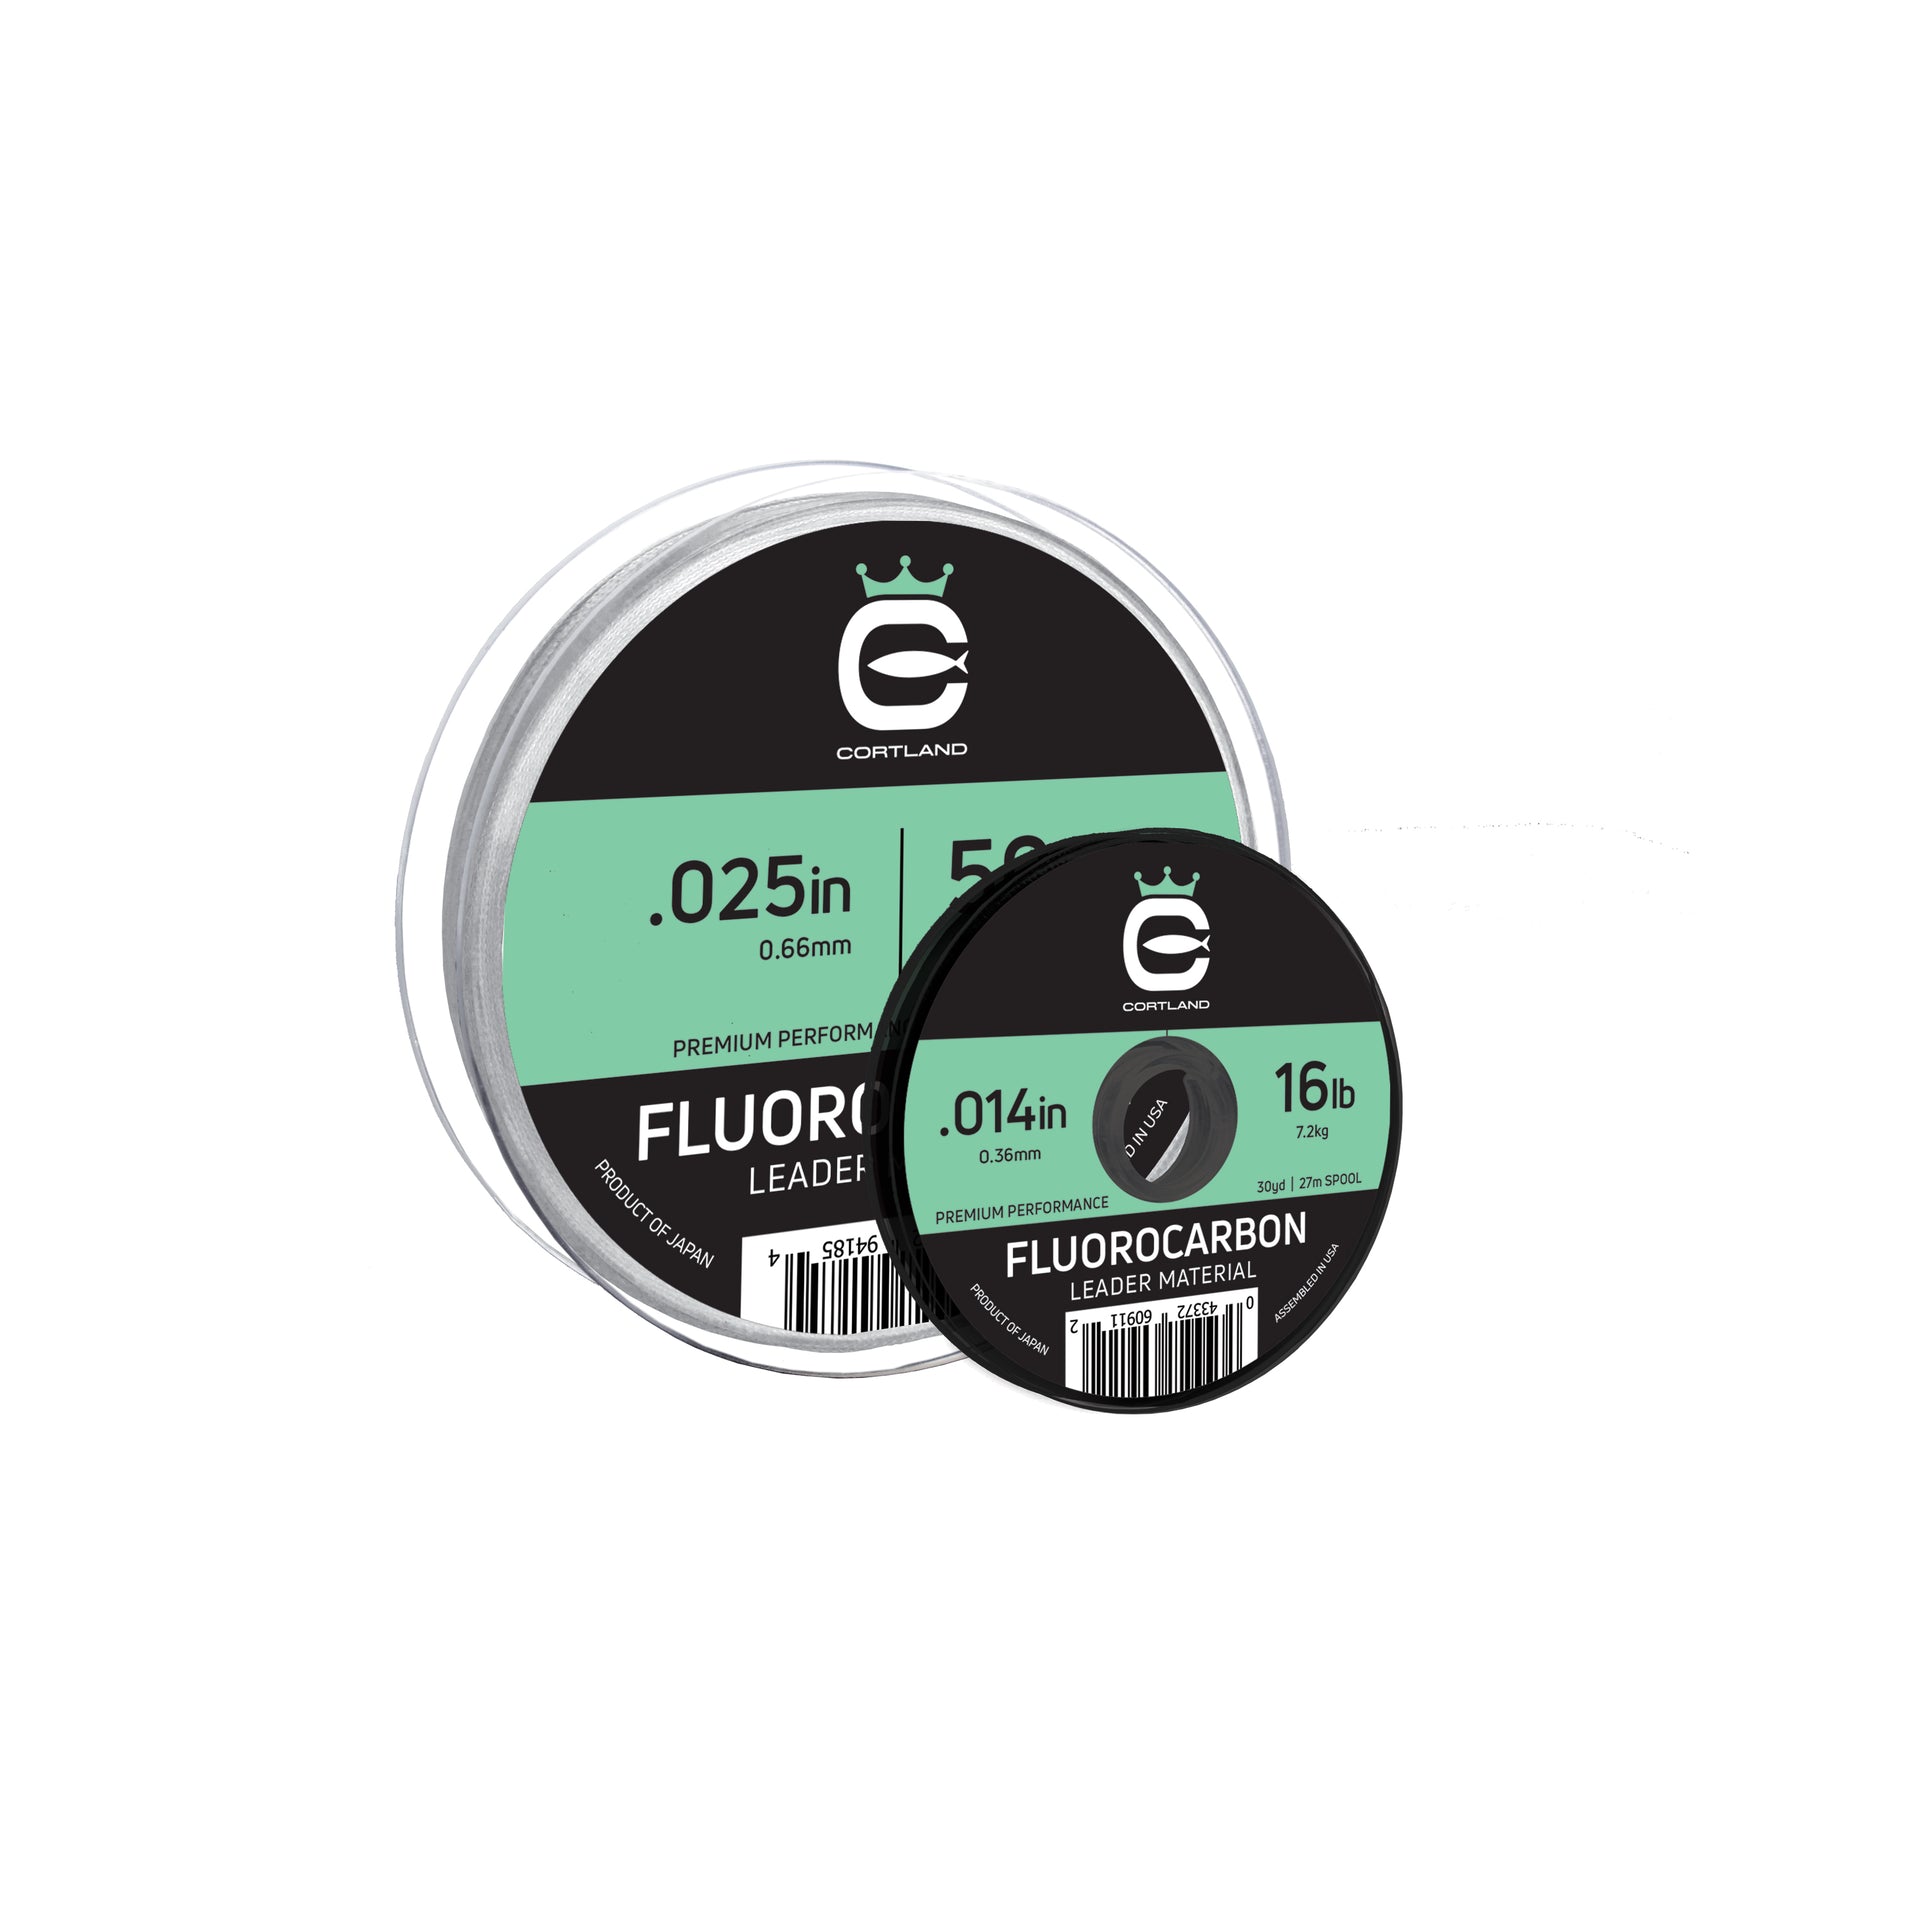 The Best Fluorocarbon Fishing Line for Leaders and Main Line